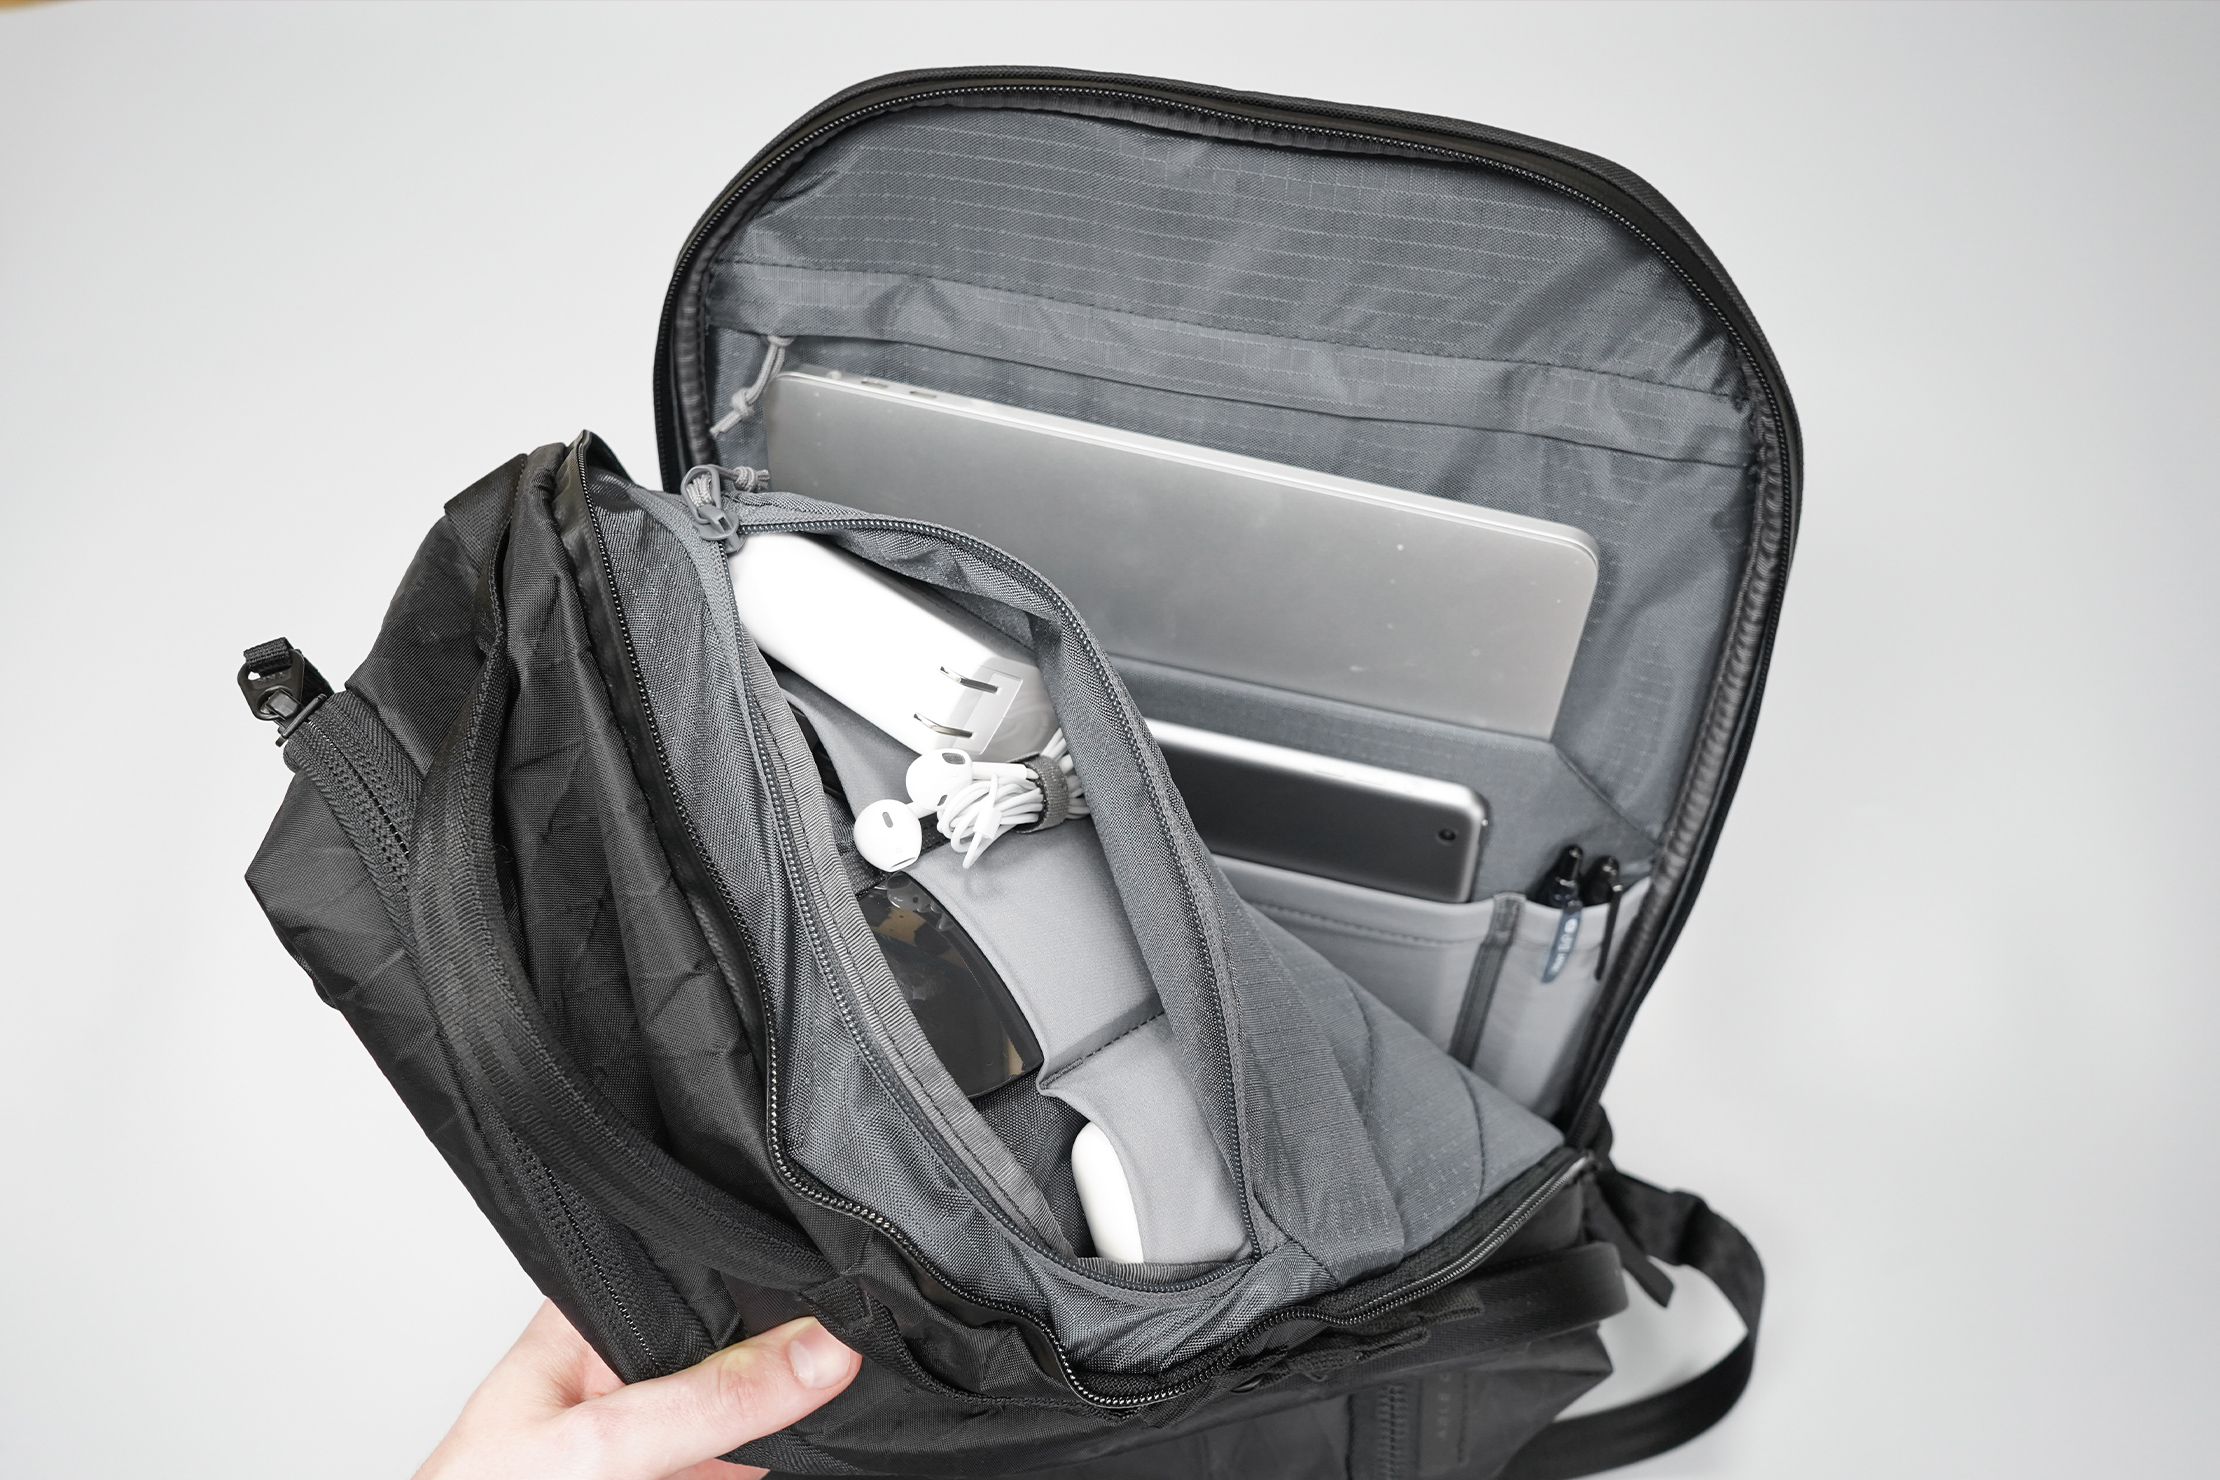 Able Carry Max Backpack | Tons of organization in the laptop compartment alone